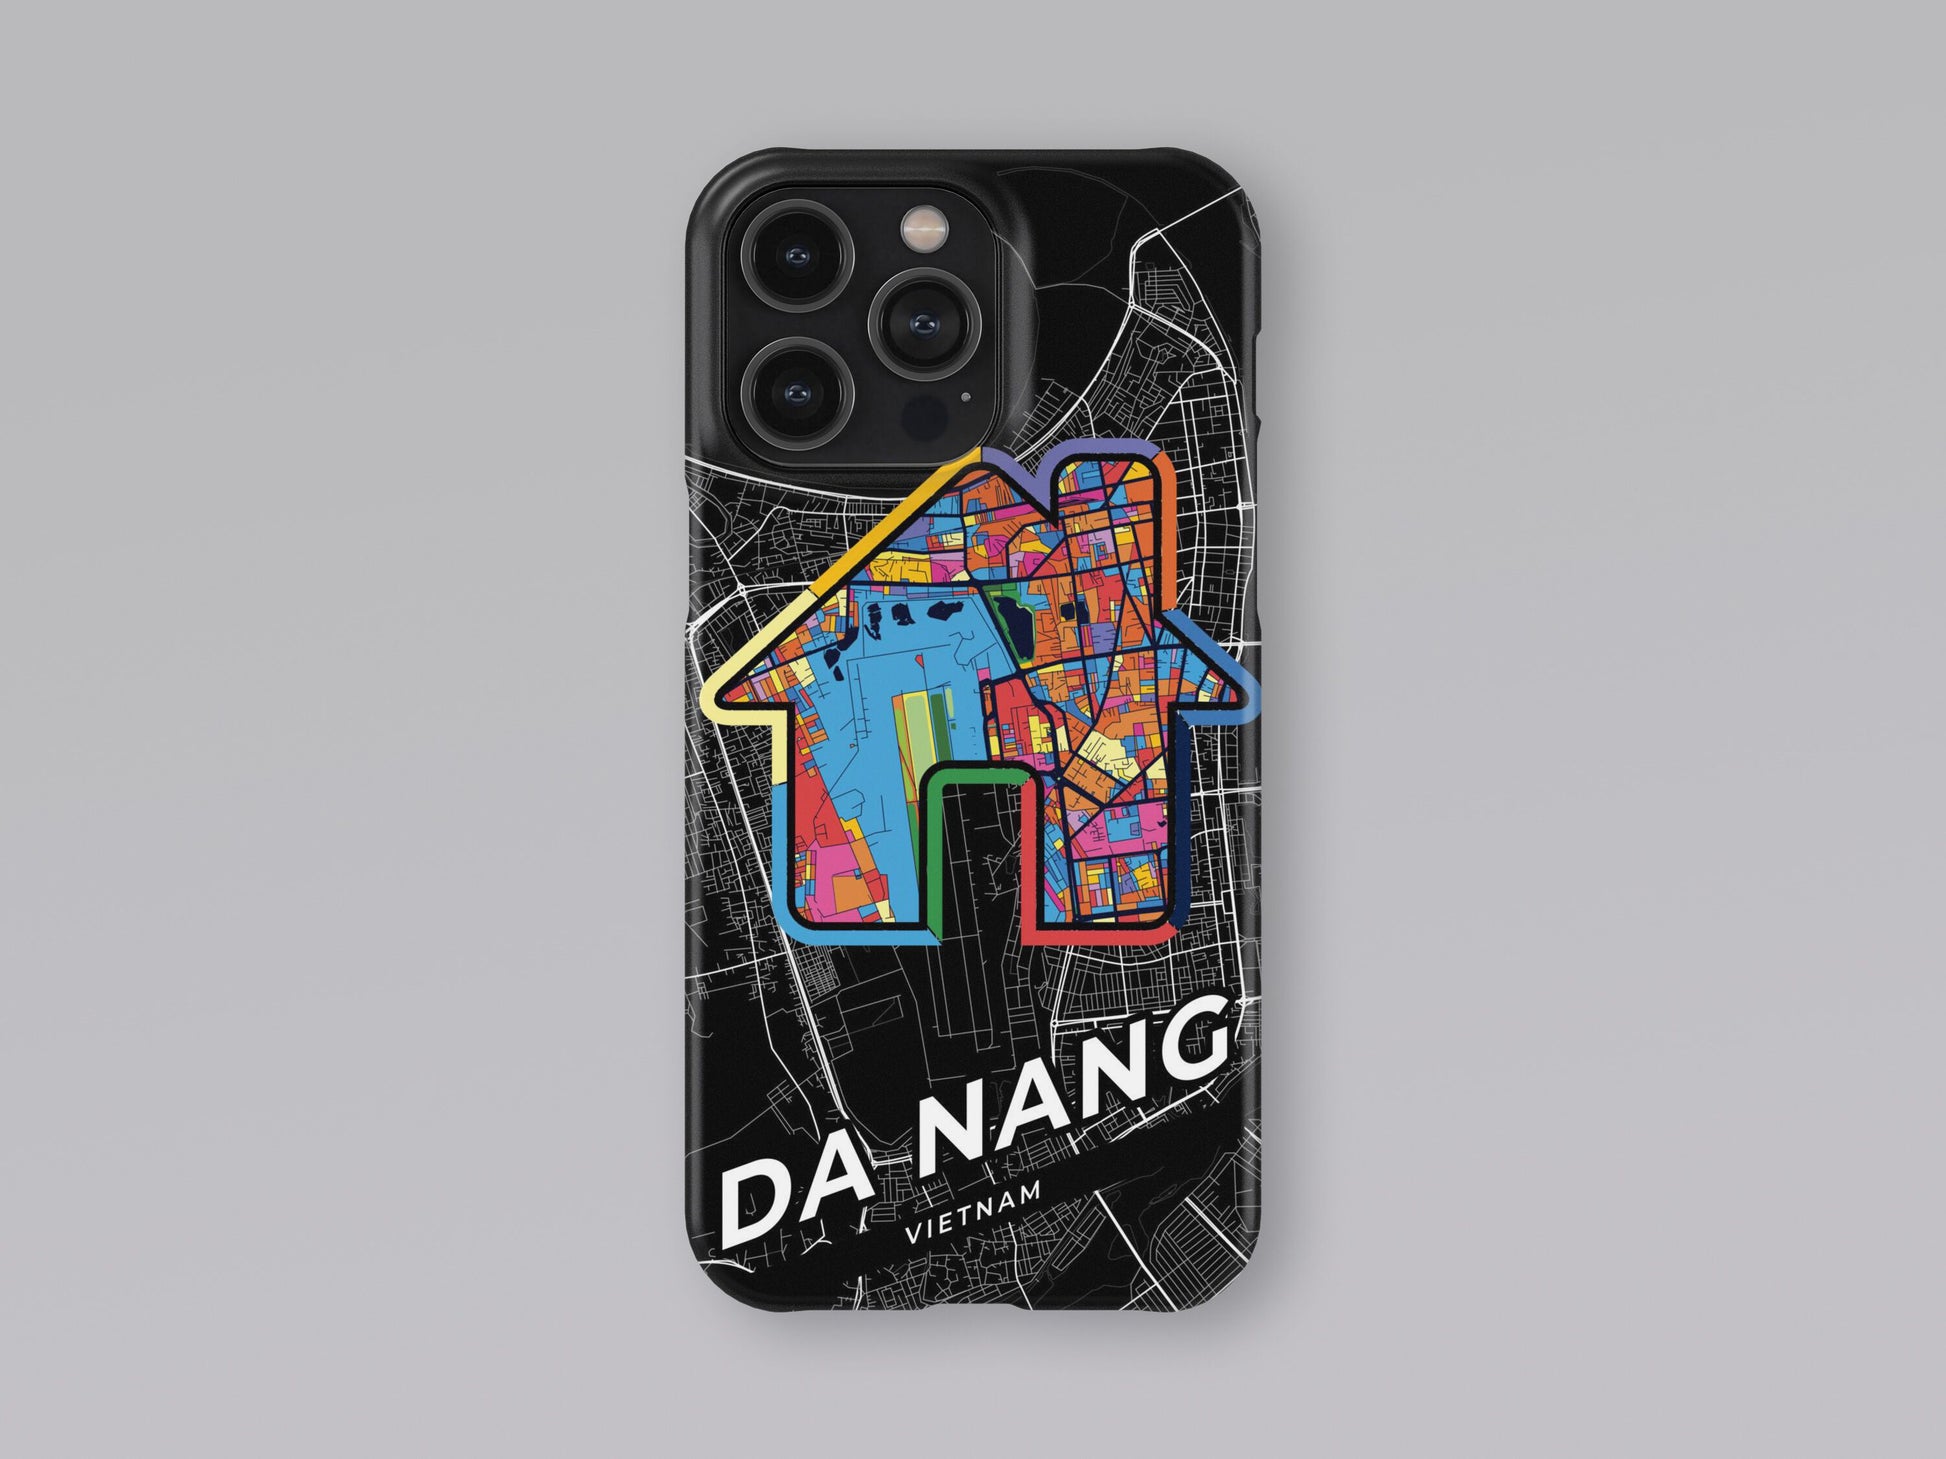 Da Nang Vietnam slim phone case with colorful icon. Birthday, wedding or housewarming gift. Couple match cases. 3